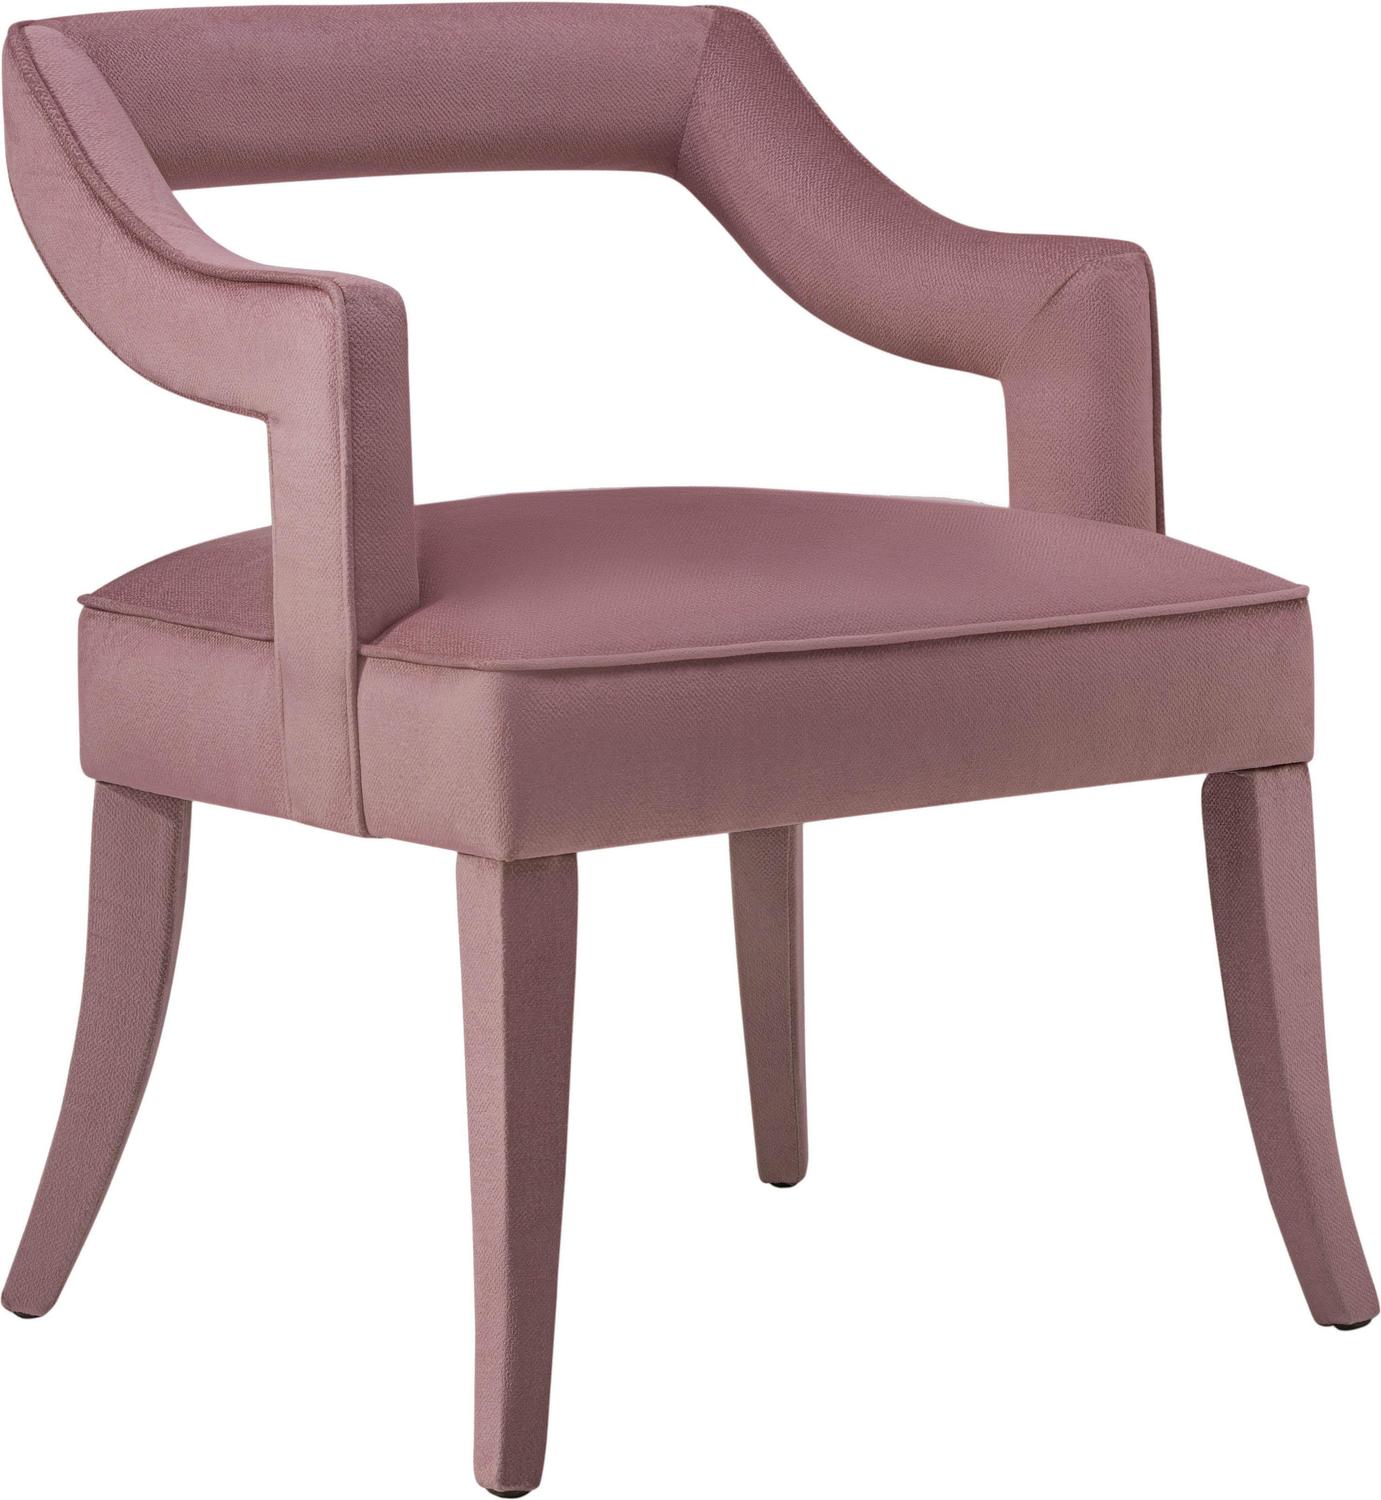 Tov Furniture Dining Chairs Chairs Pink